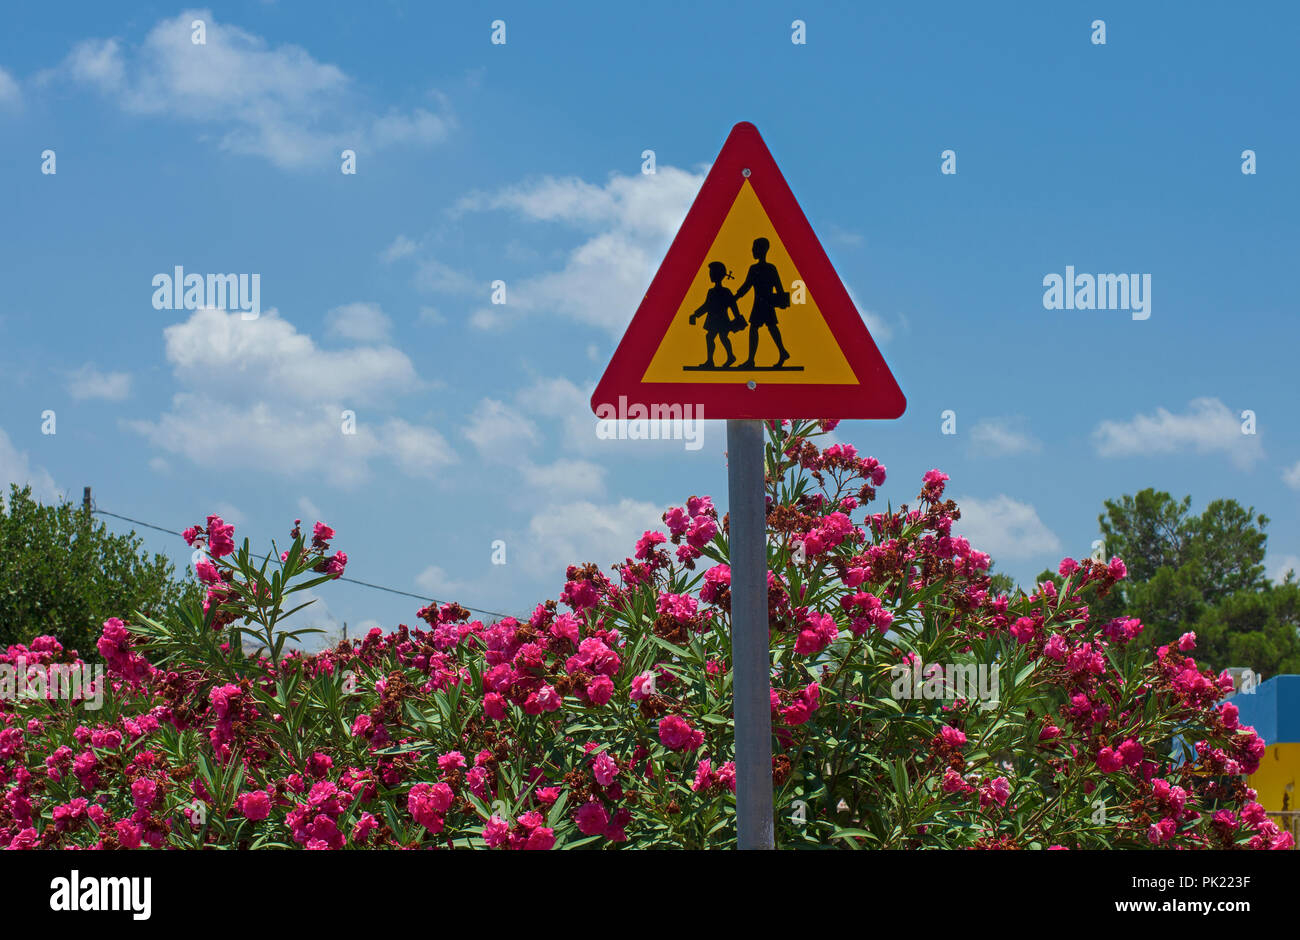 Triangle road sign 'Caution children' sunlit in the Greece Stock Photo